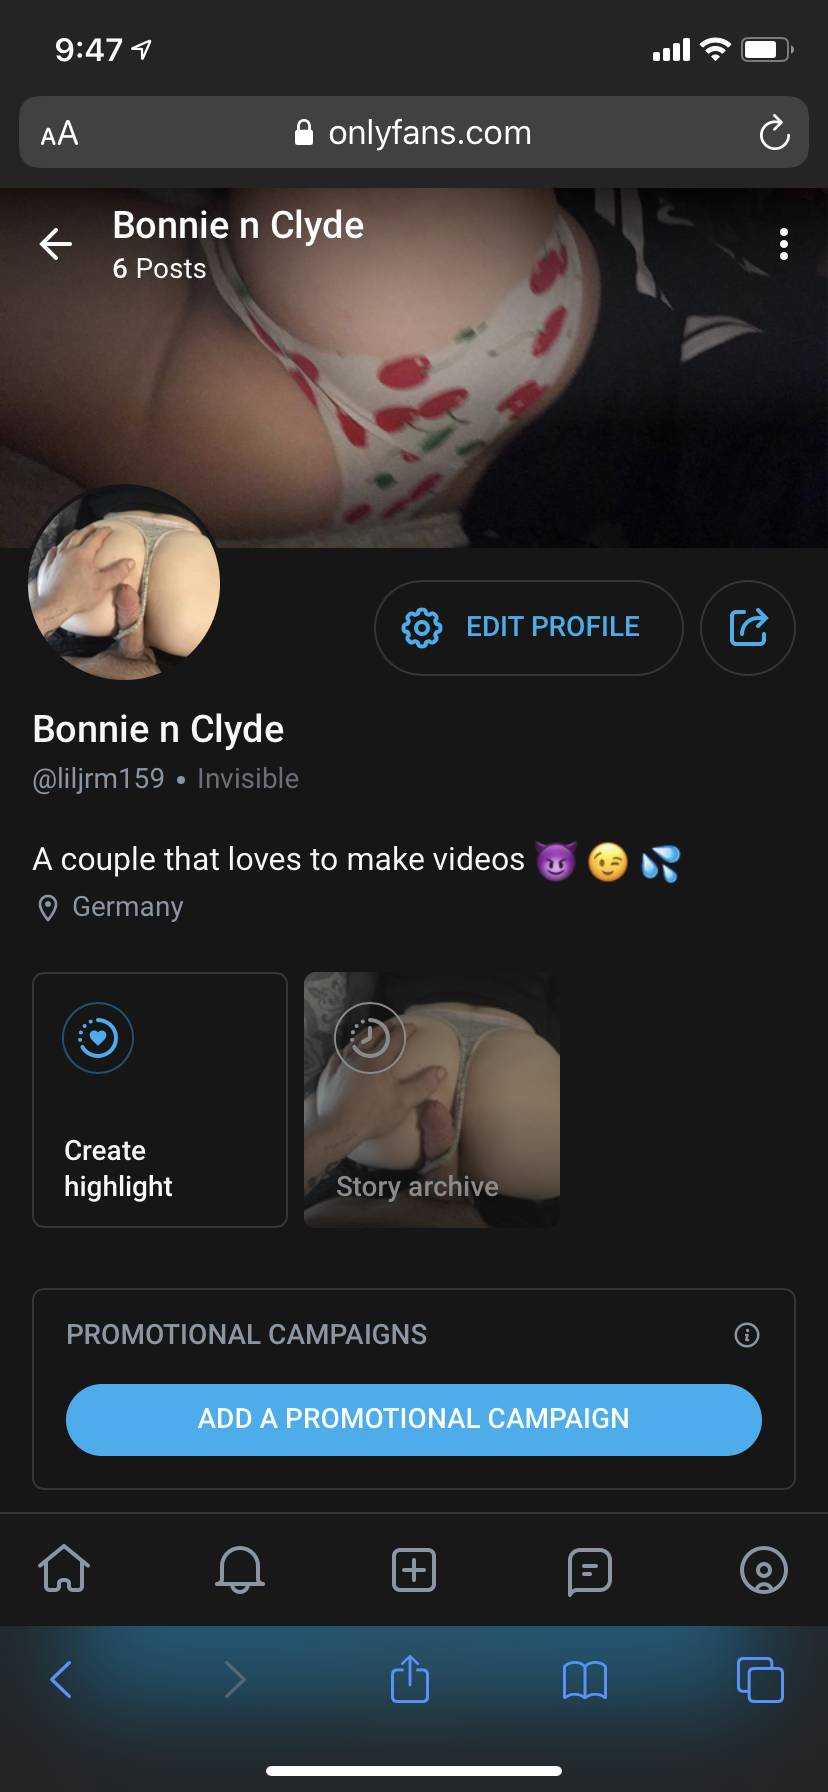 Photo by Bonnie n clyde with the username @liljman58,  August 27, 2020 at 10:36 AM